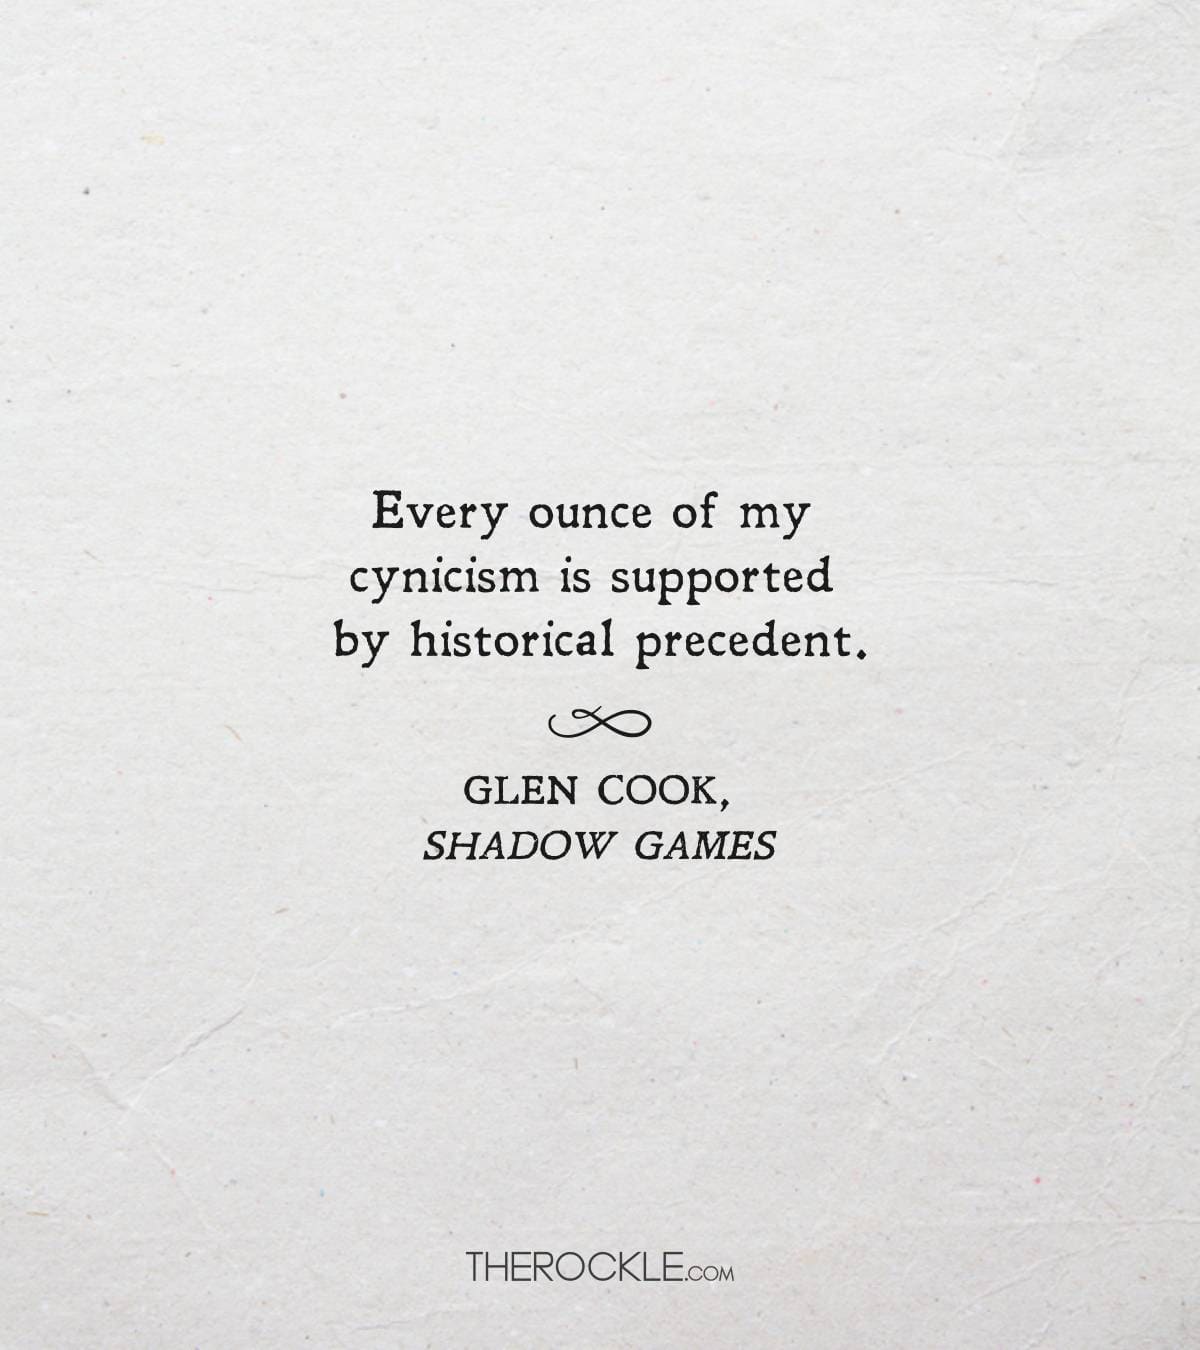 Quote from Glen Cook's Shadow Games